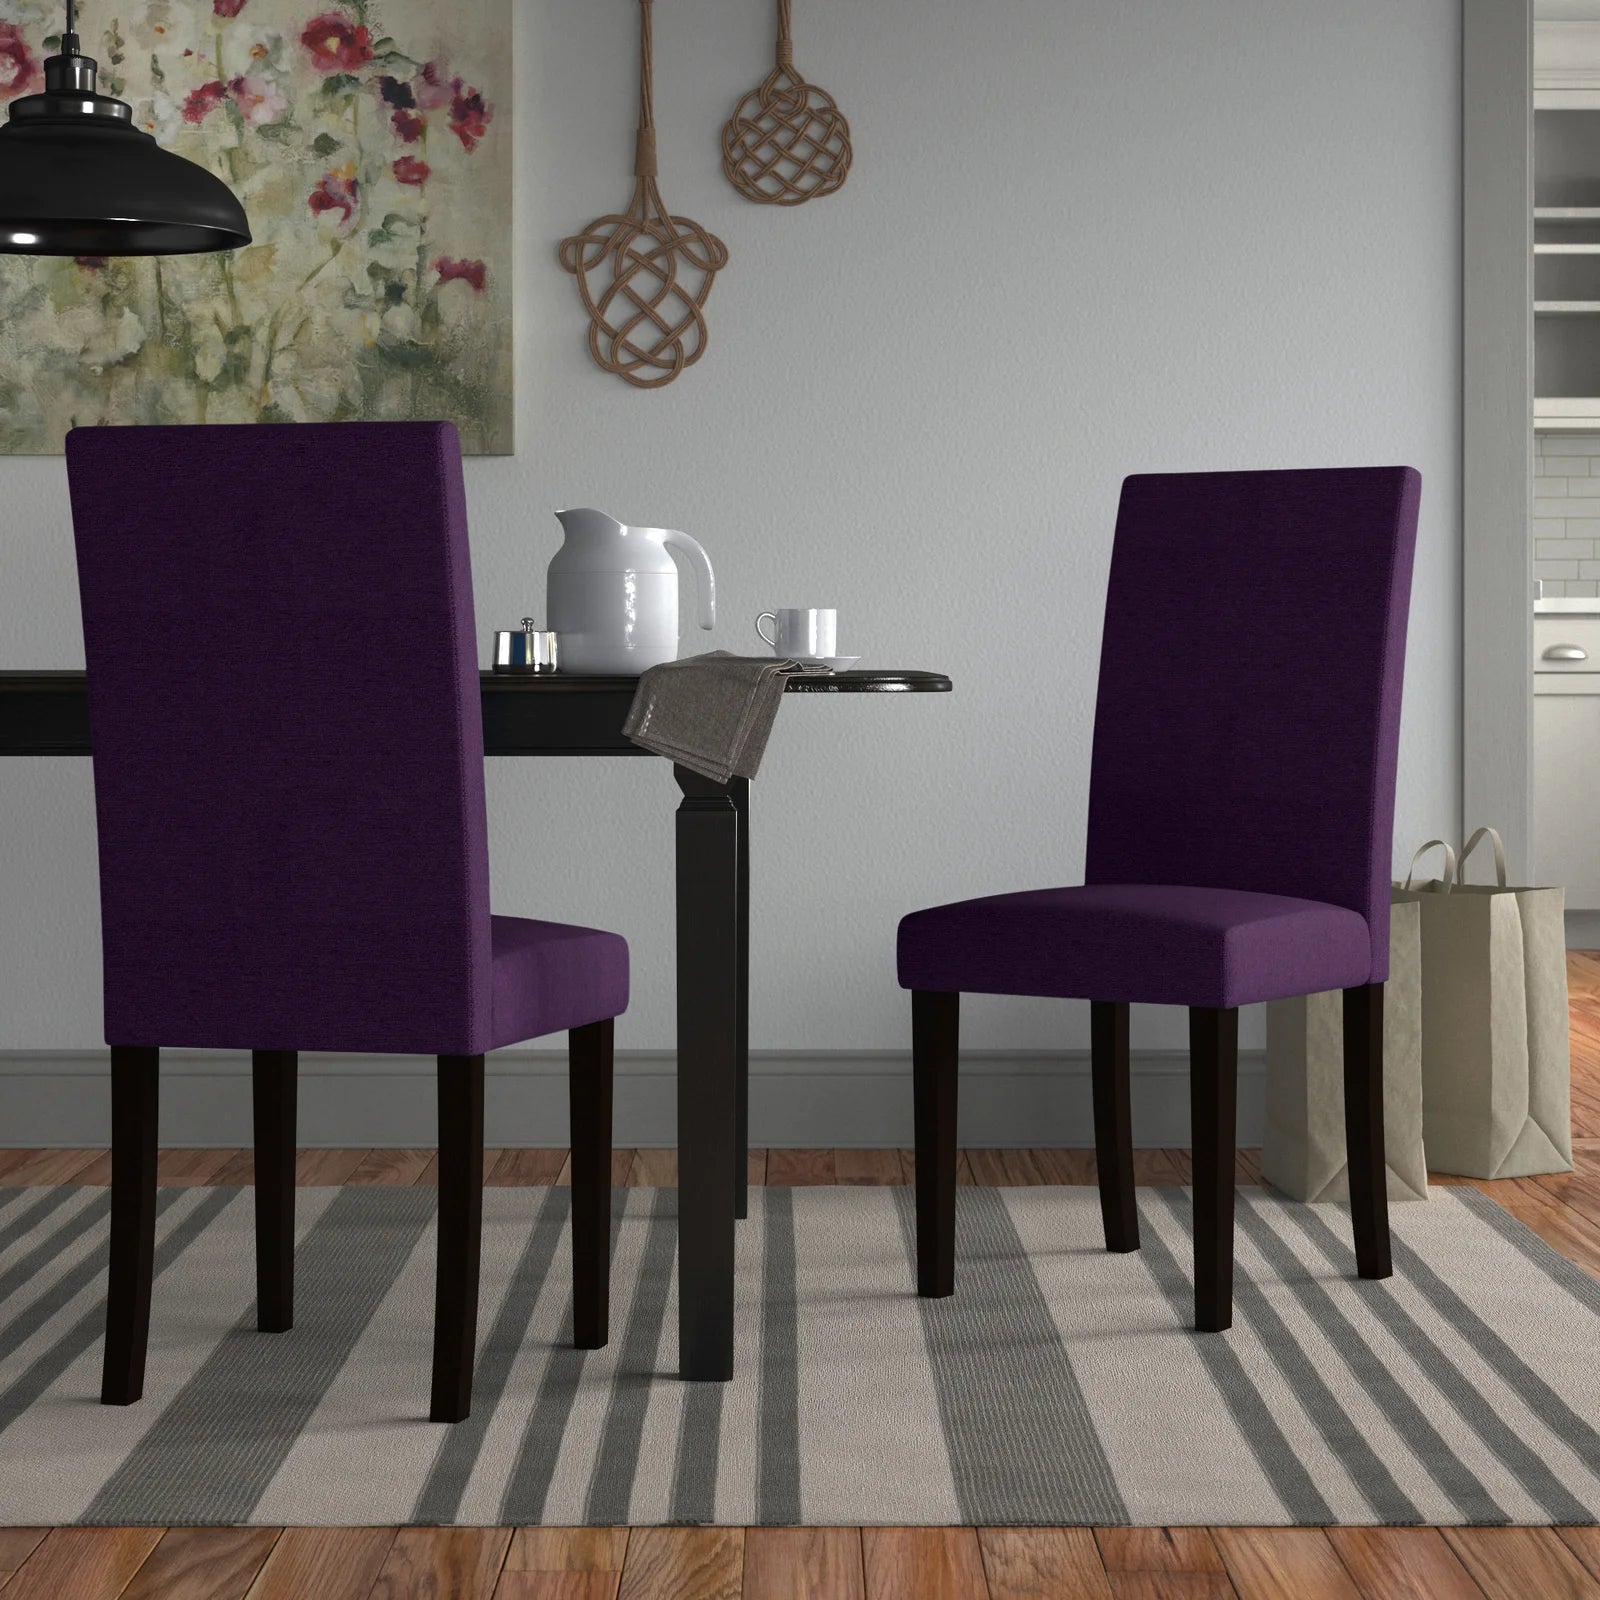 Royal Purple Full Back Solid Wood Dining Chair